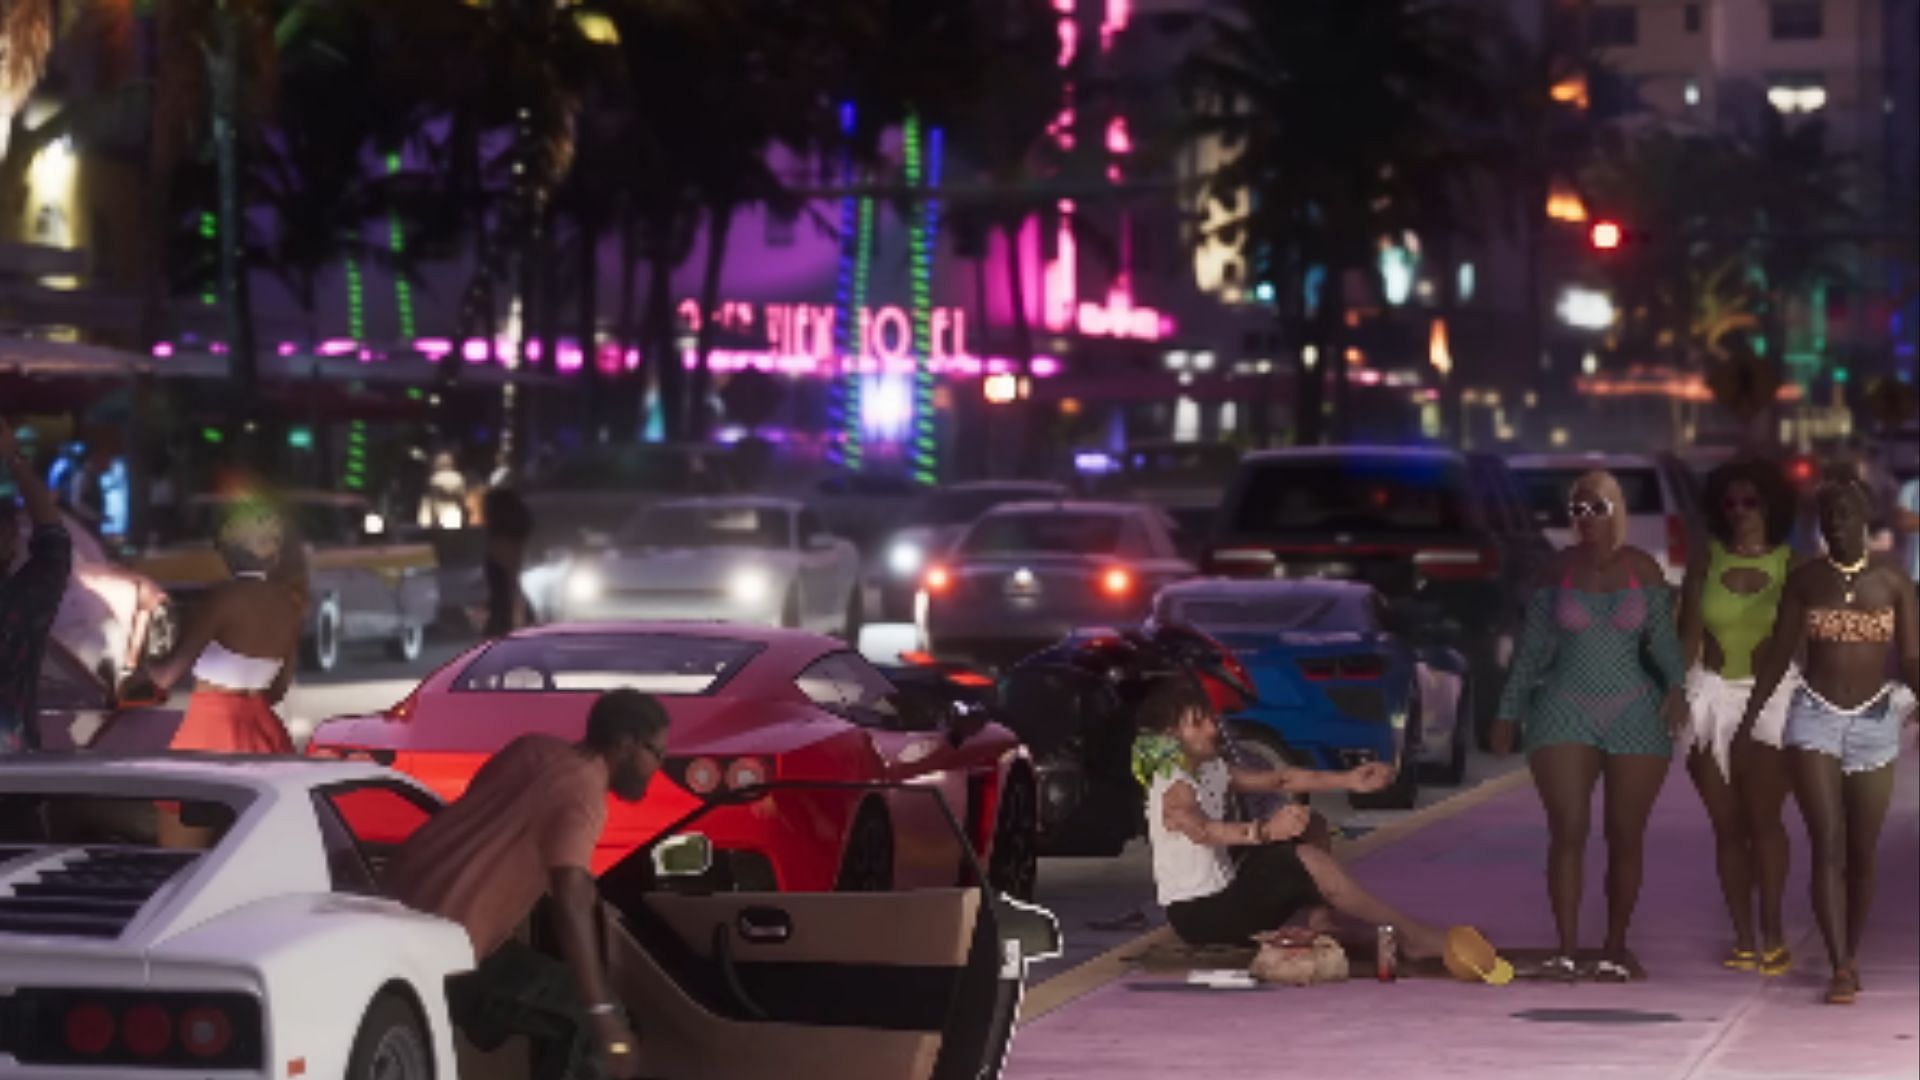 The Coquette D10 (in blue) spotted in the trailer (Image via Rockstar Games)